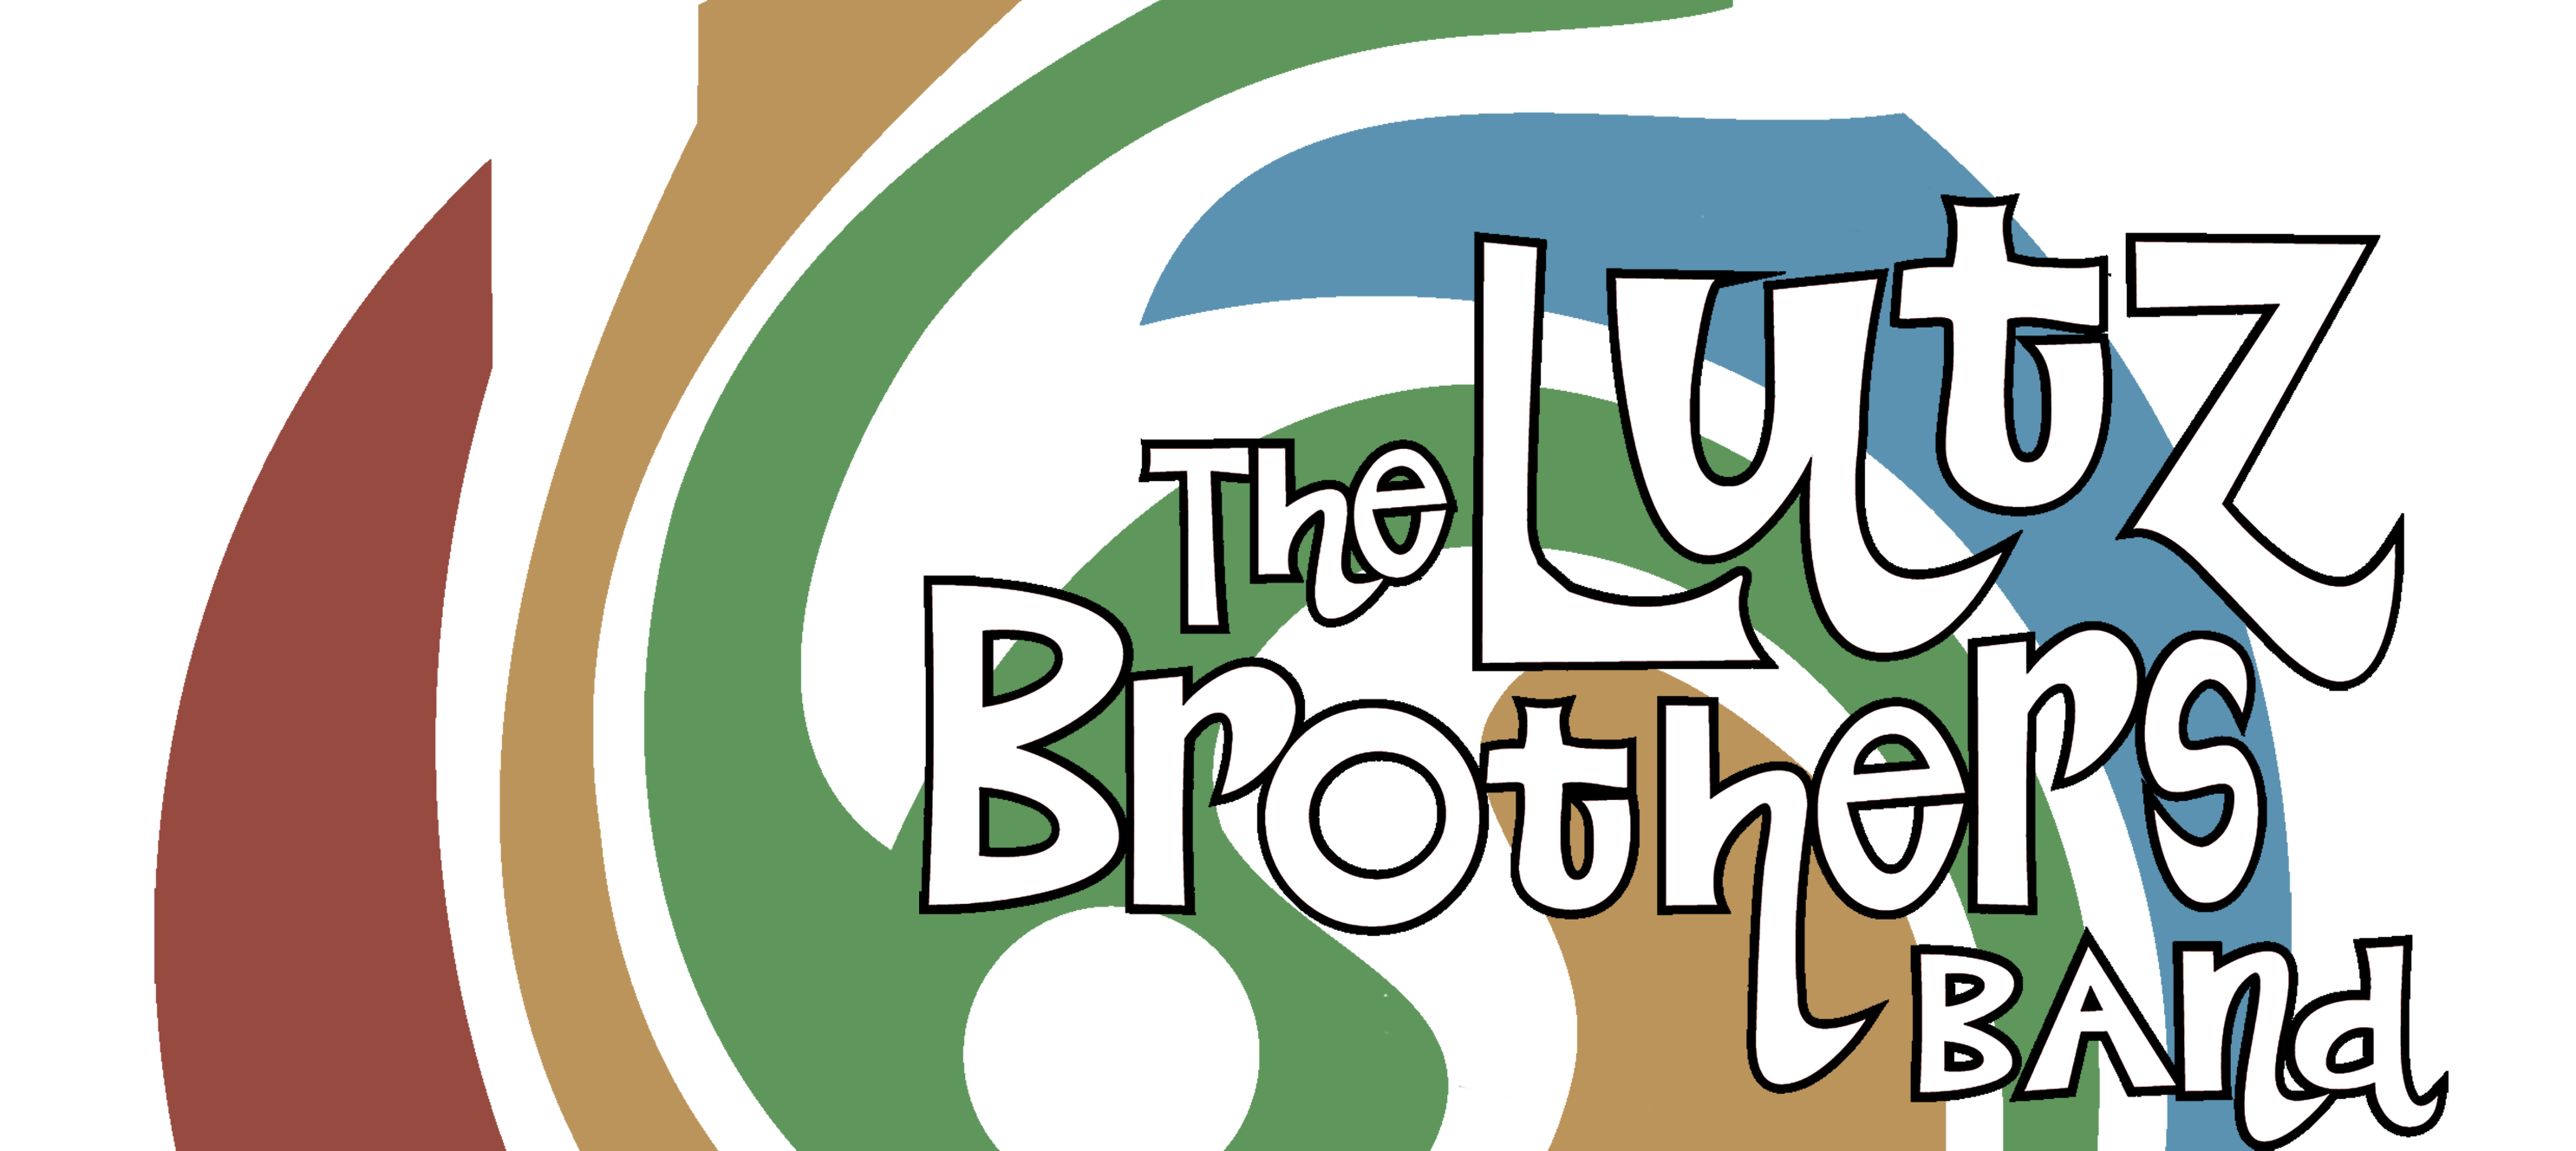 The Lutz Brothers Band